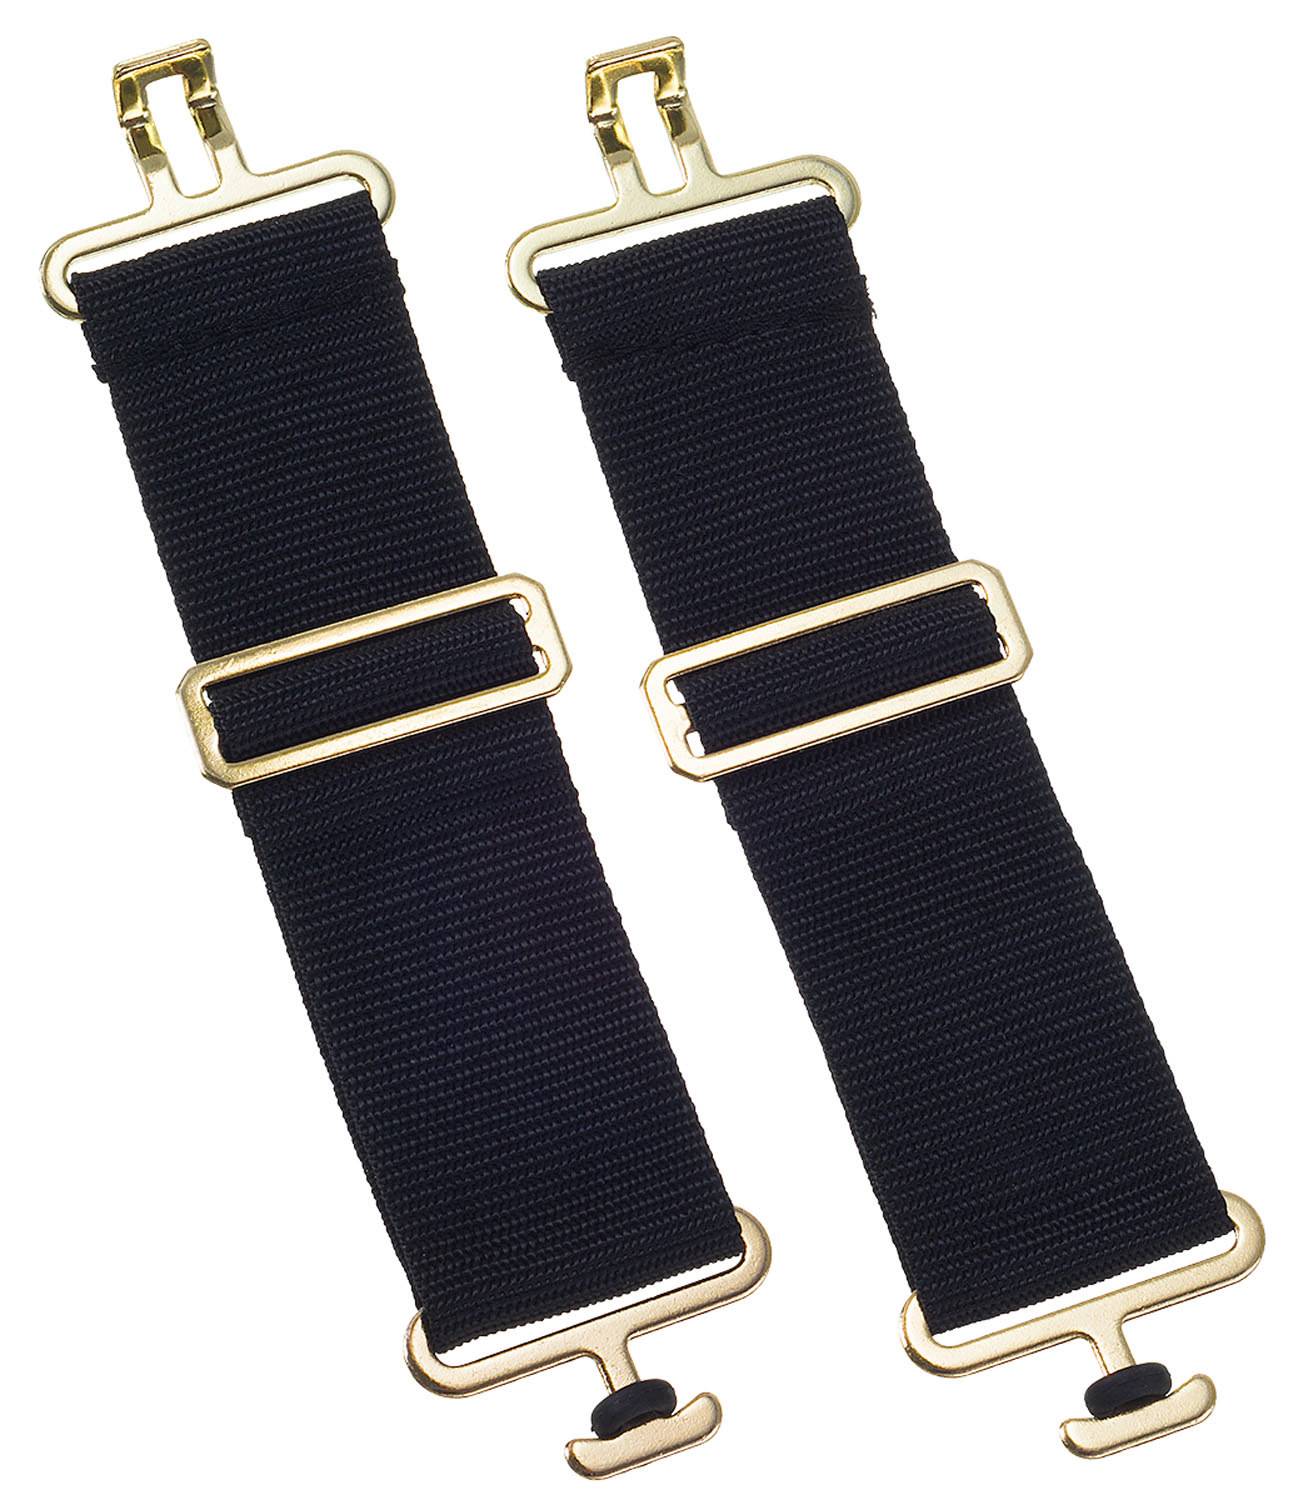 Tough 1 Belly Surcingle Strap Extensions